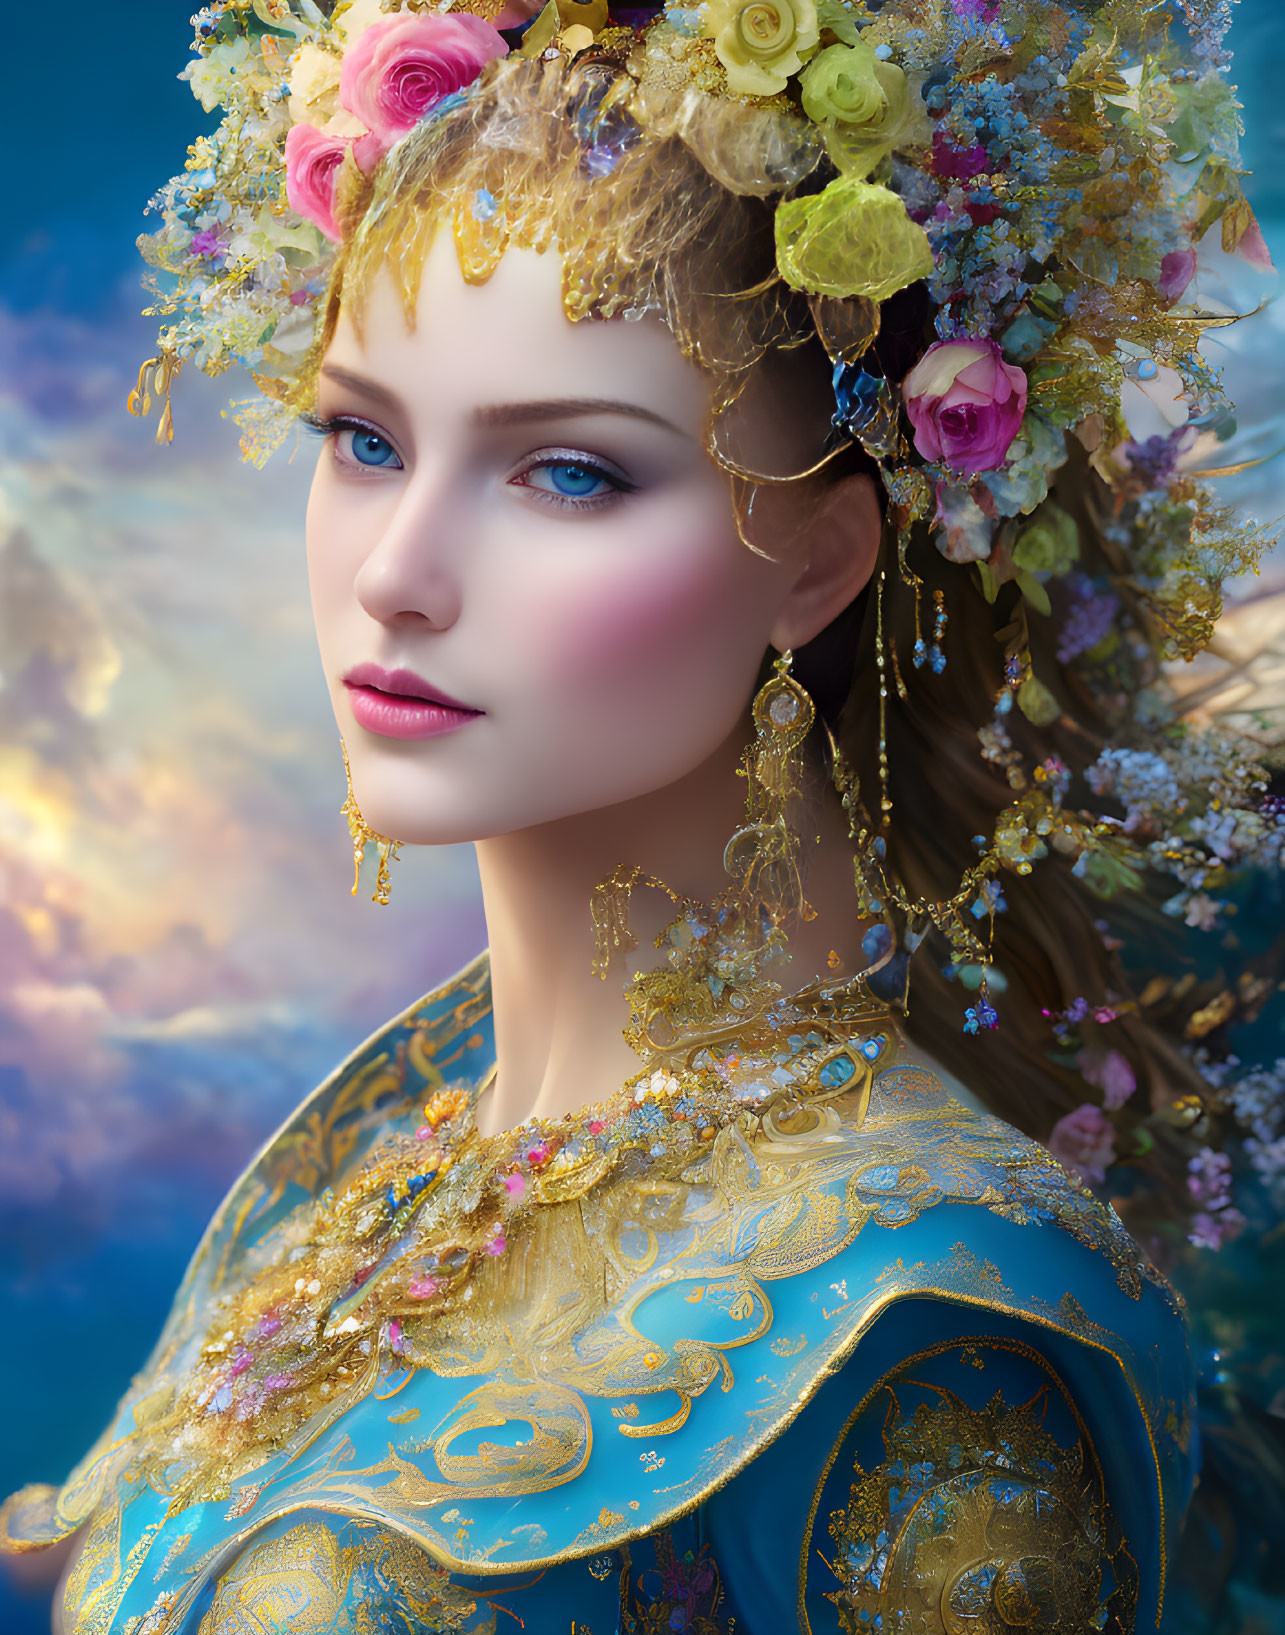 Portrait of Woman with Floral Headdress and Blue/Gold Dress Against Cloudy Sky